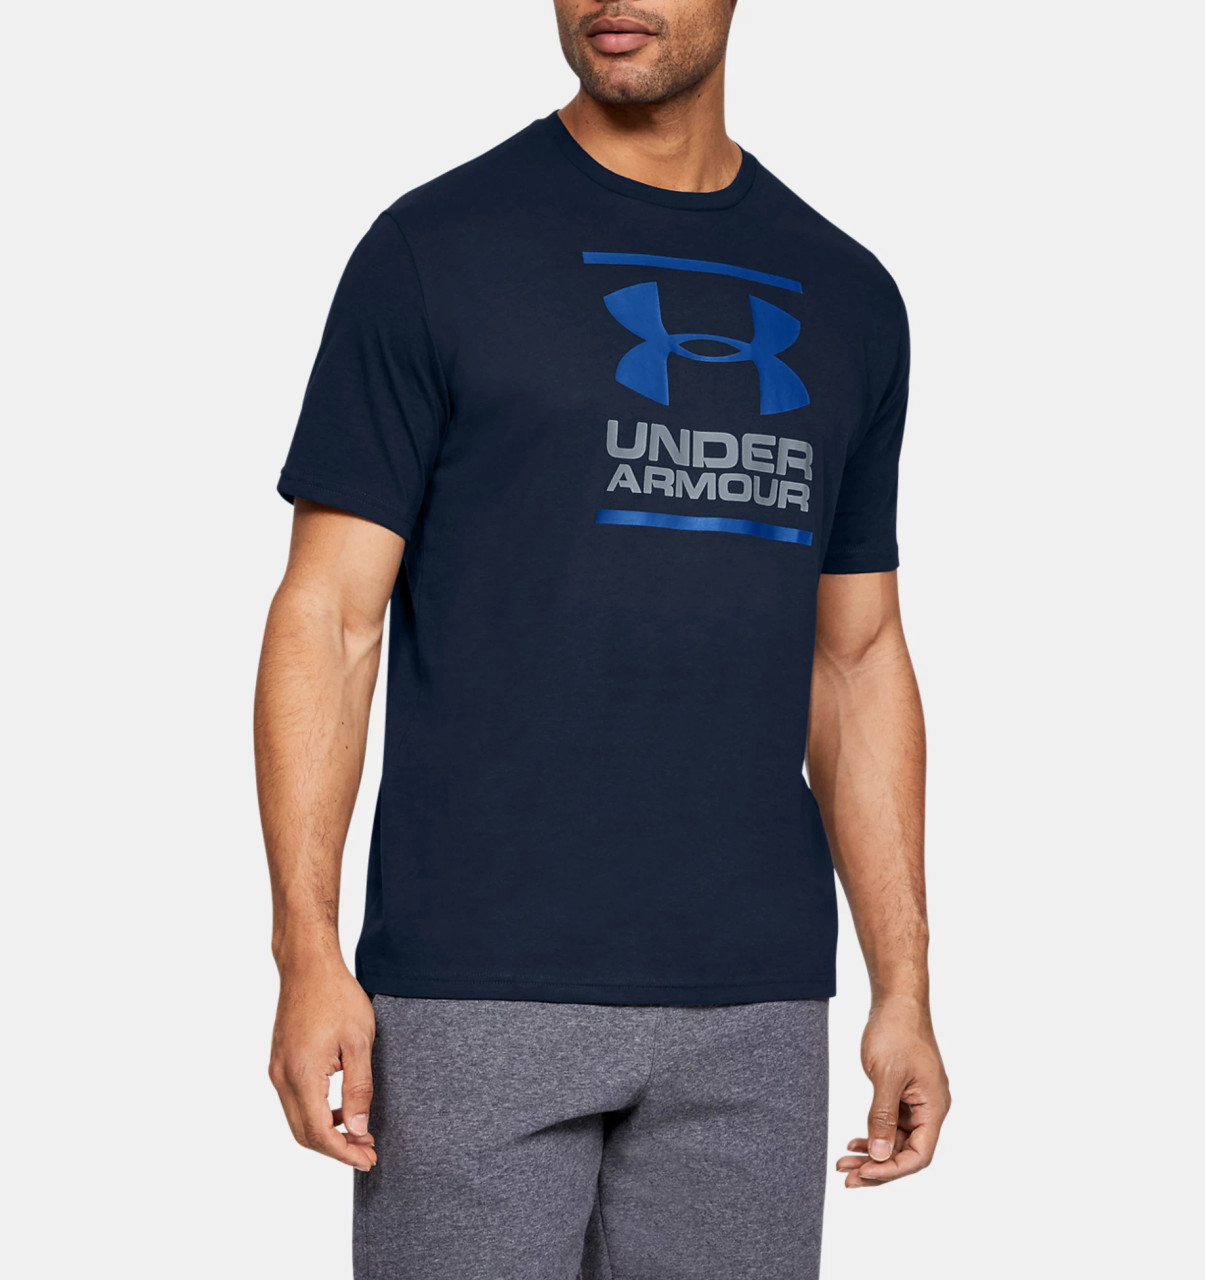  Under Armour - Men's T-Shirts / Men's Tops, Tees & Shirts:  Clothing, Shoes & Accessories